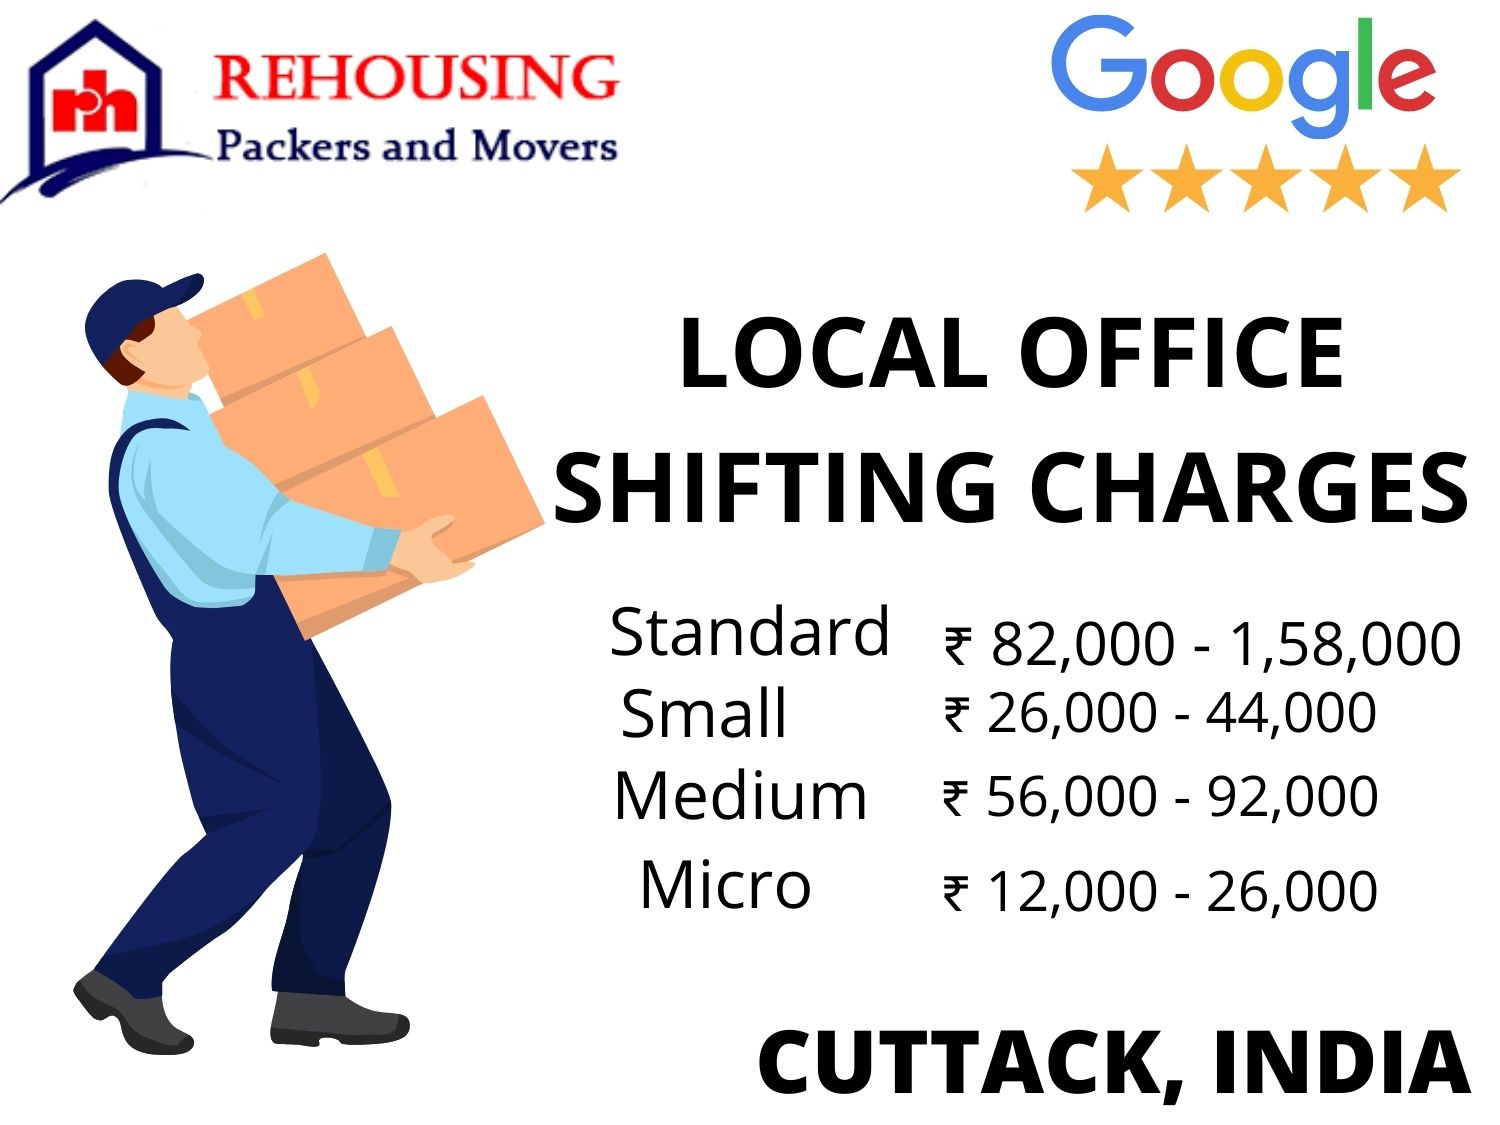 Medium office local shifting prices in Cuttack